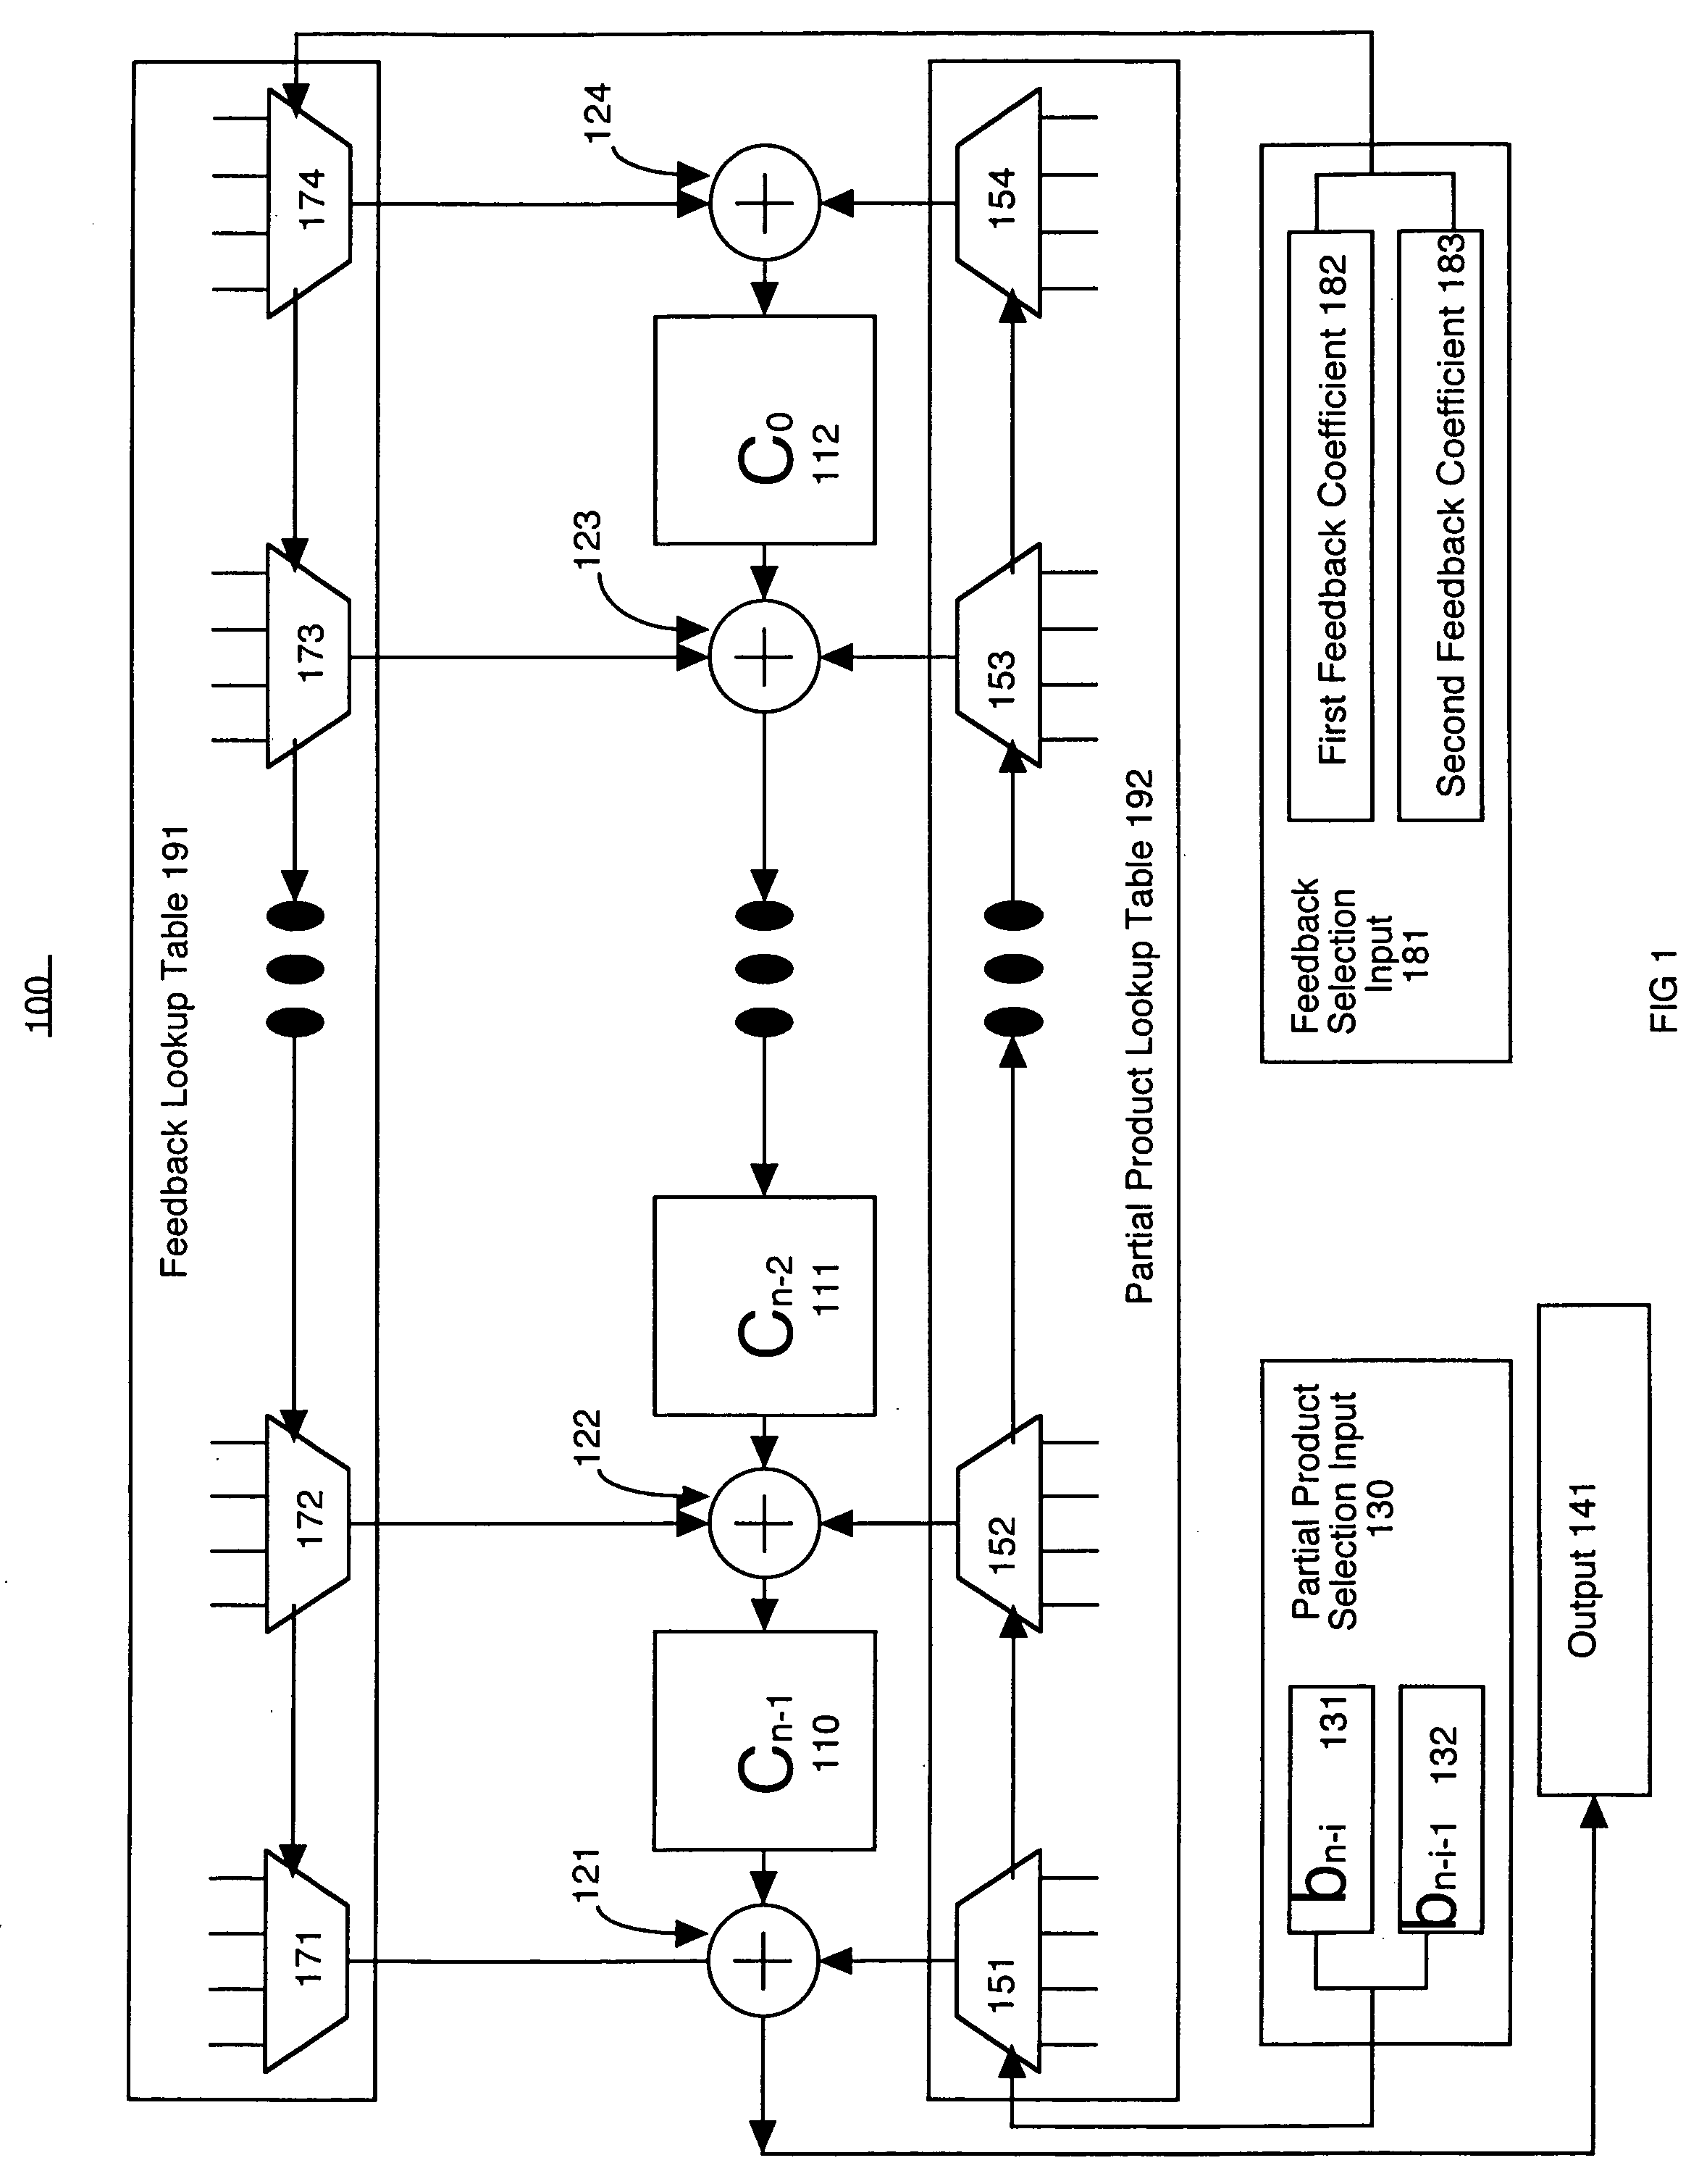 Galois field multiplication system and method